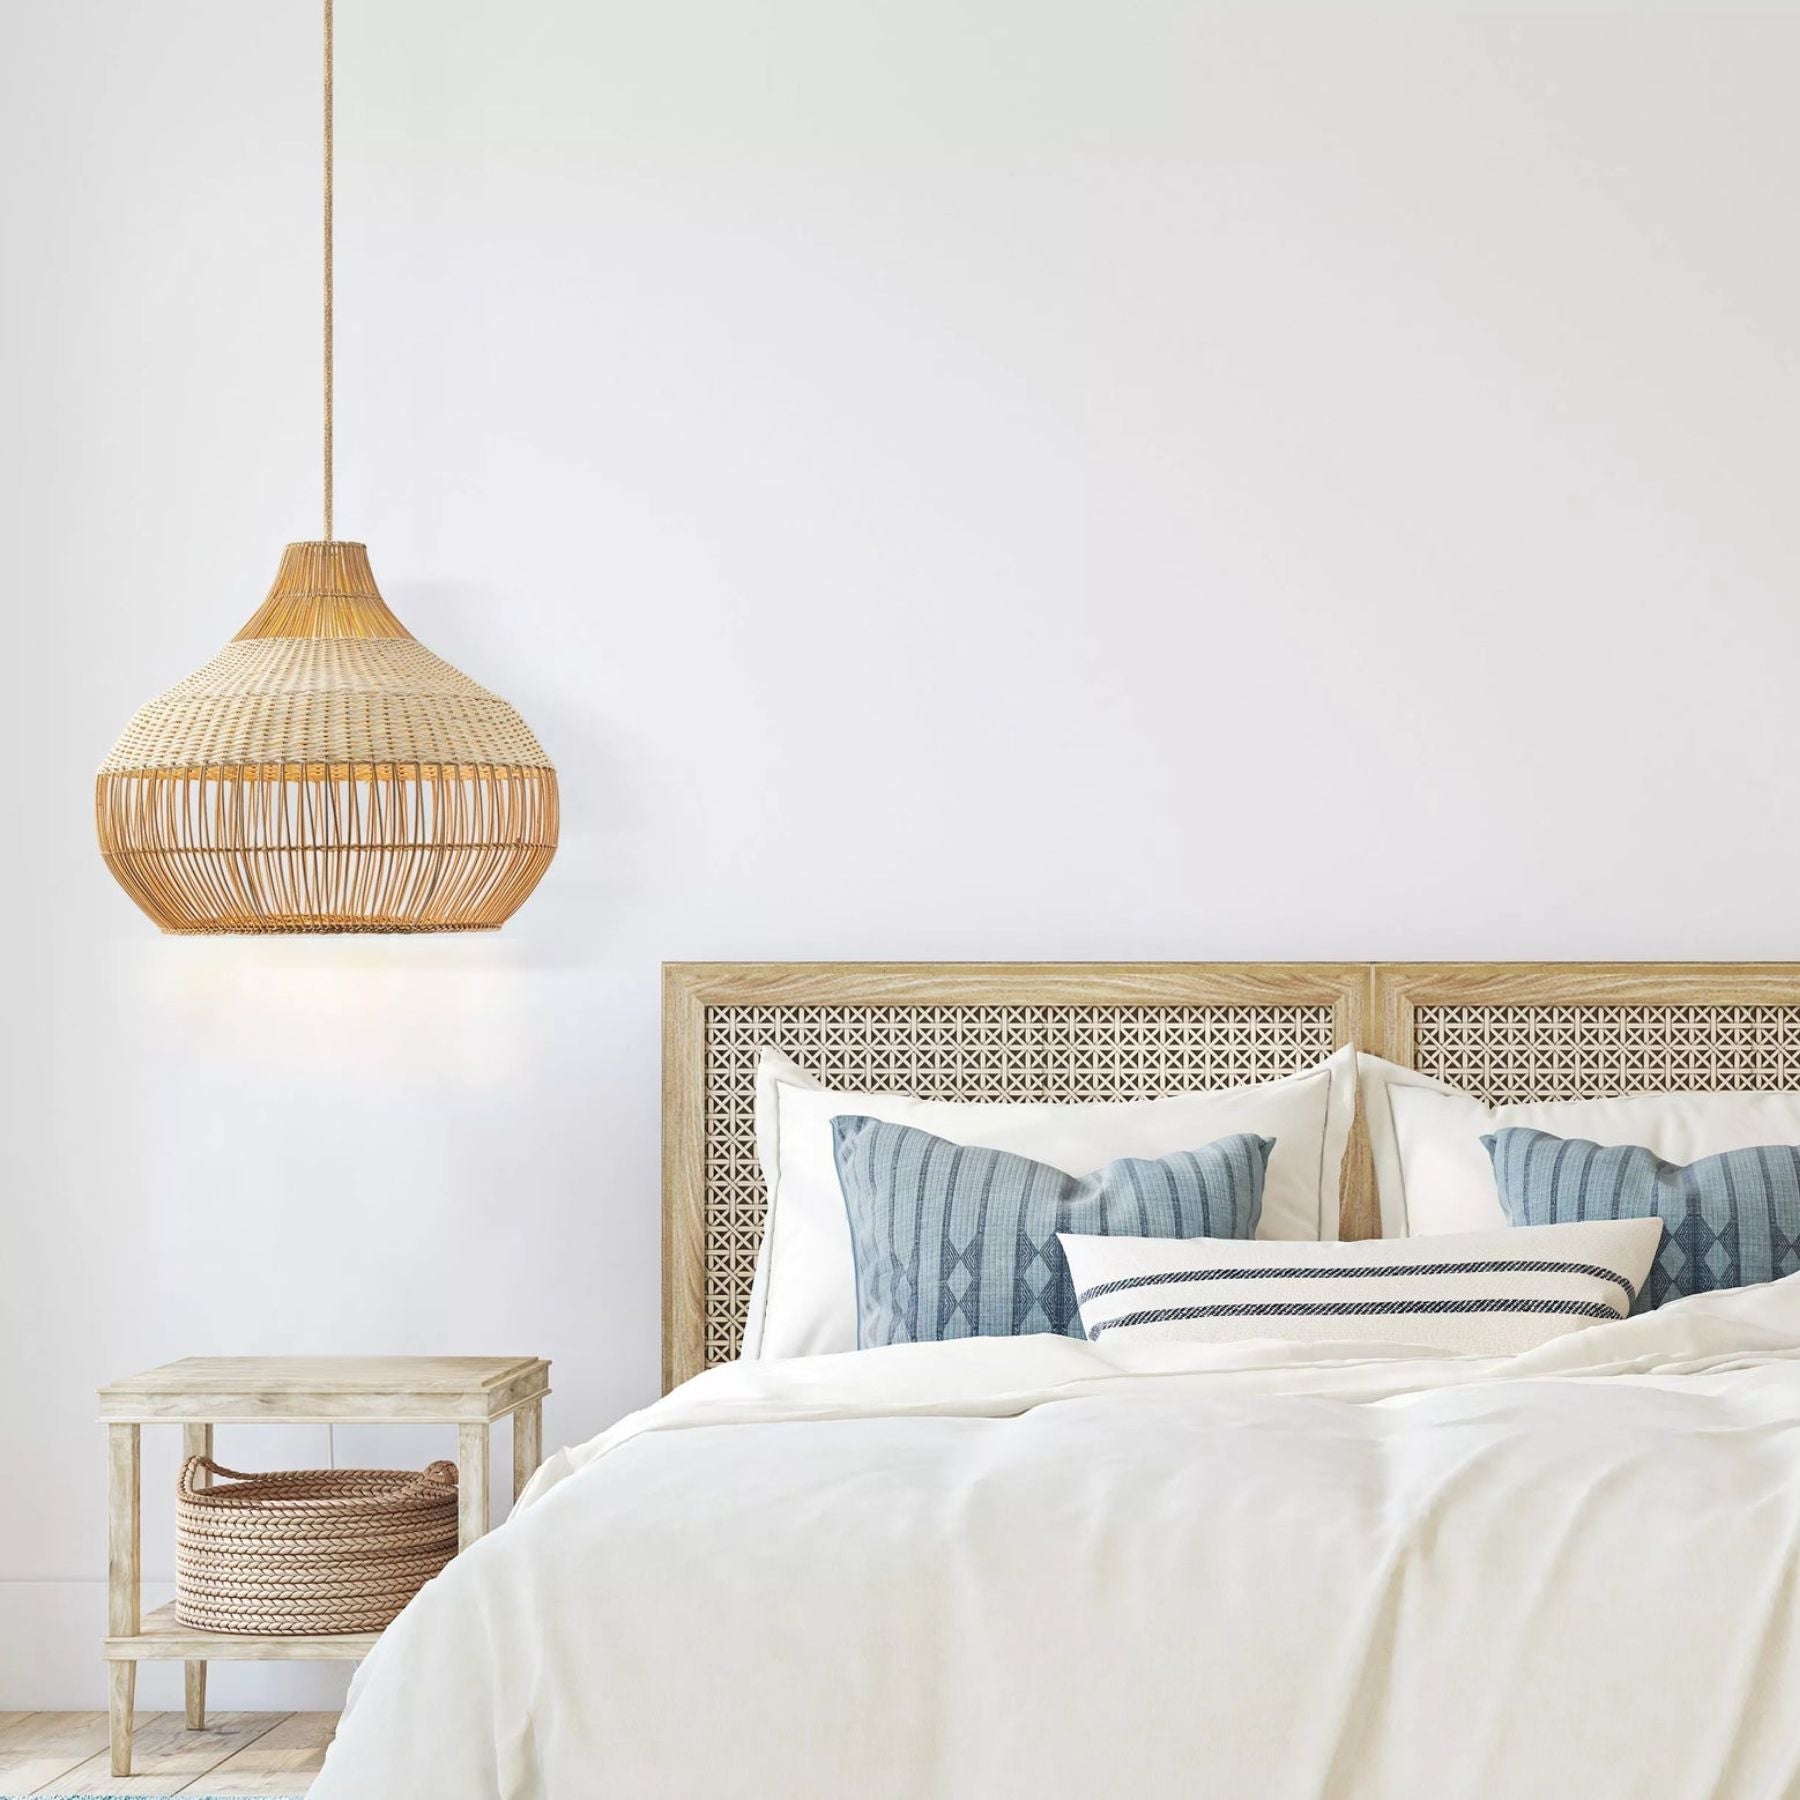 the beatrice dome rattan pendant lamp embodies beachy boho chic style helping to create an attractive reading corner that radiates a warm glow